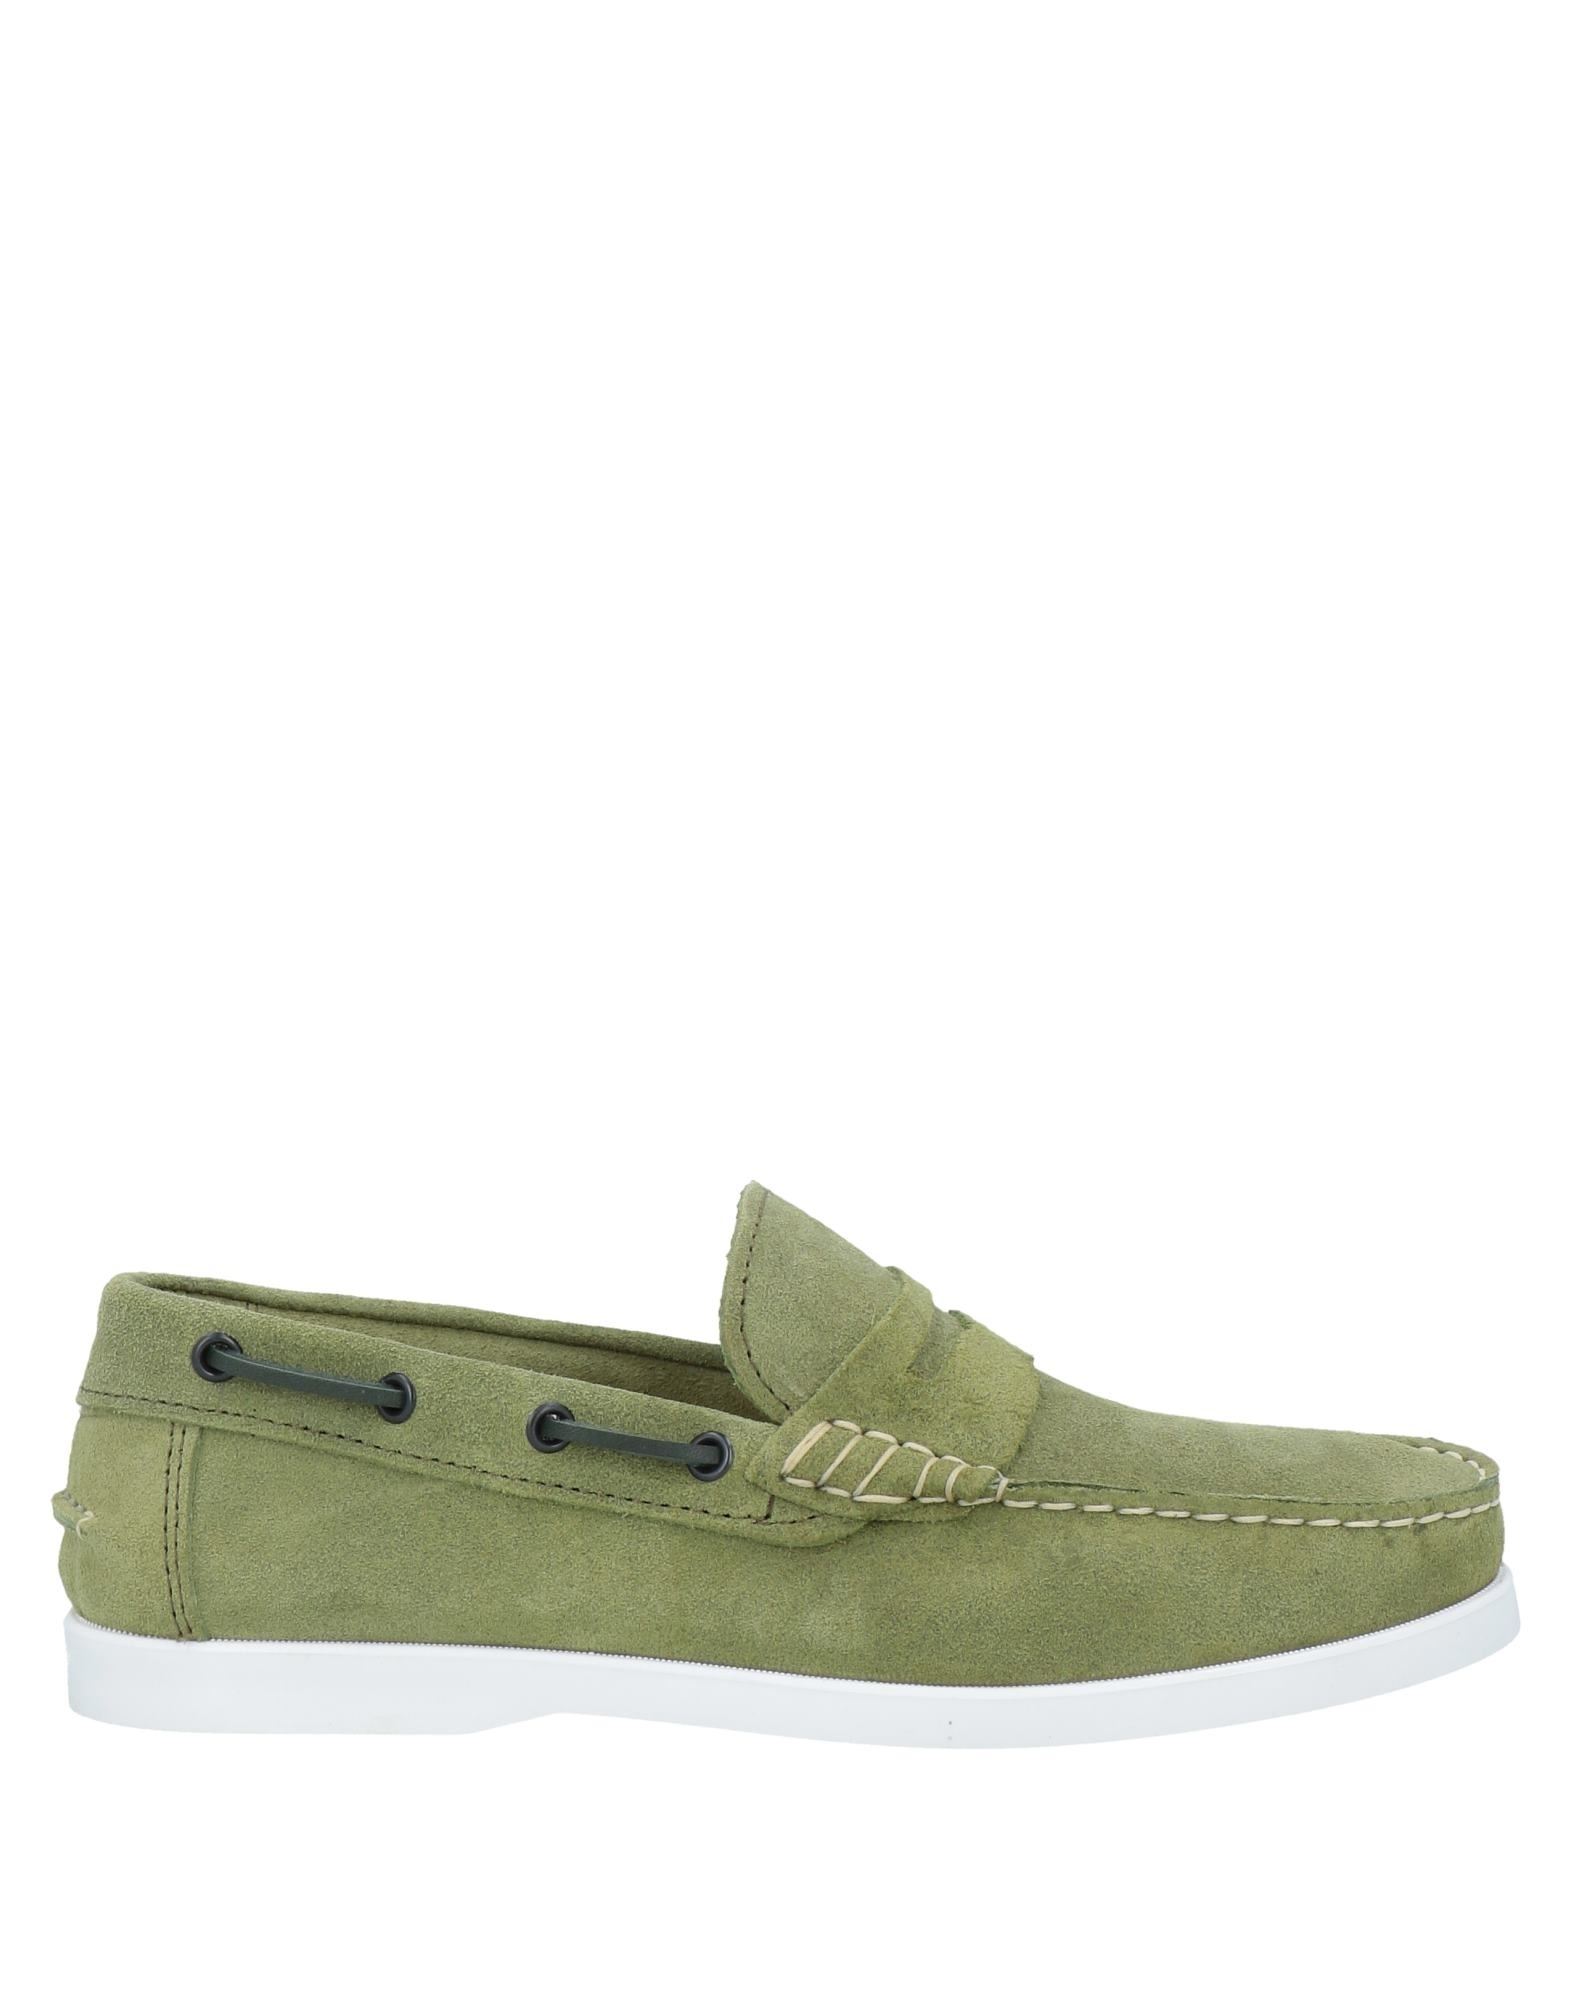 Angelo Pallotta Loafers In Sage Green